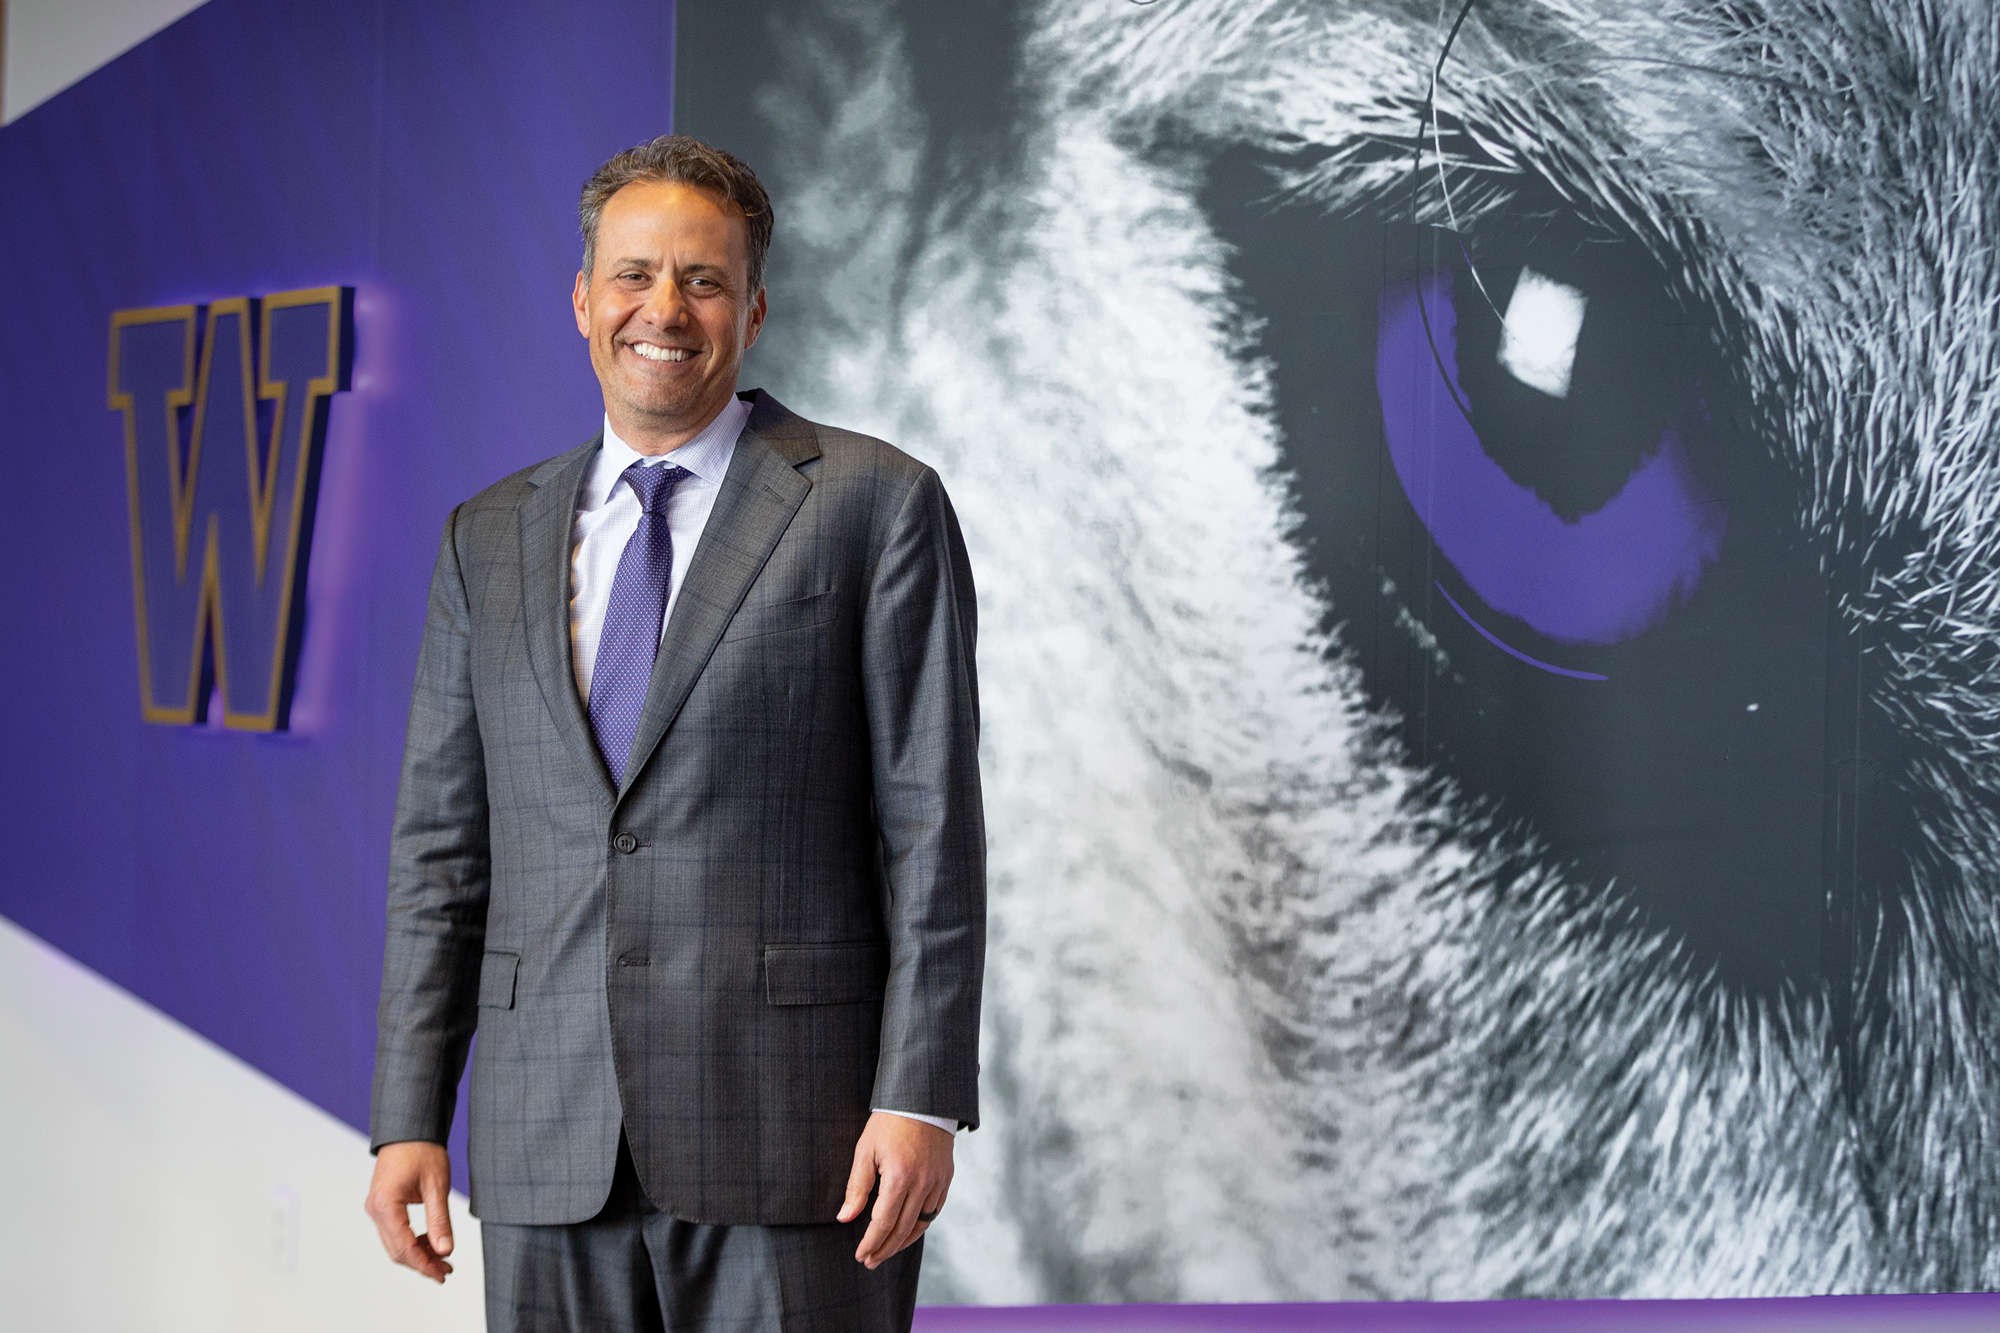 A man smiling, wearing a grey suit and purple polka dot tie, standing in front of a mural of a giant husky